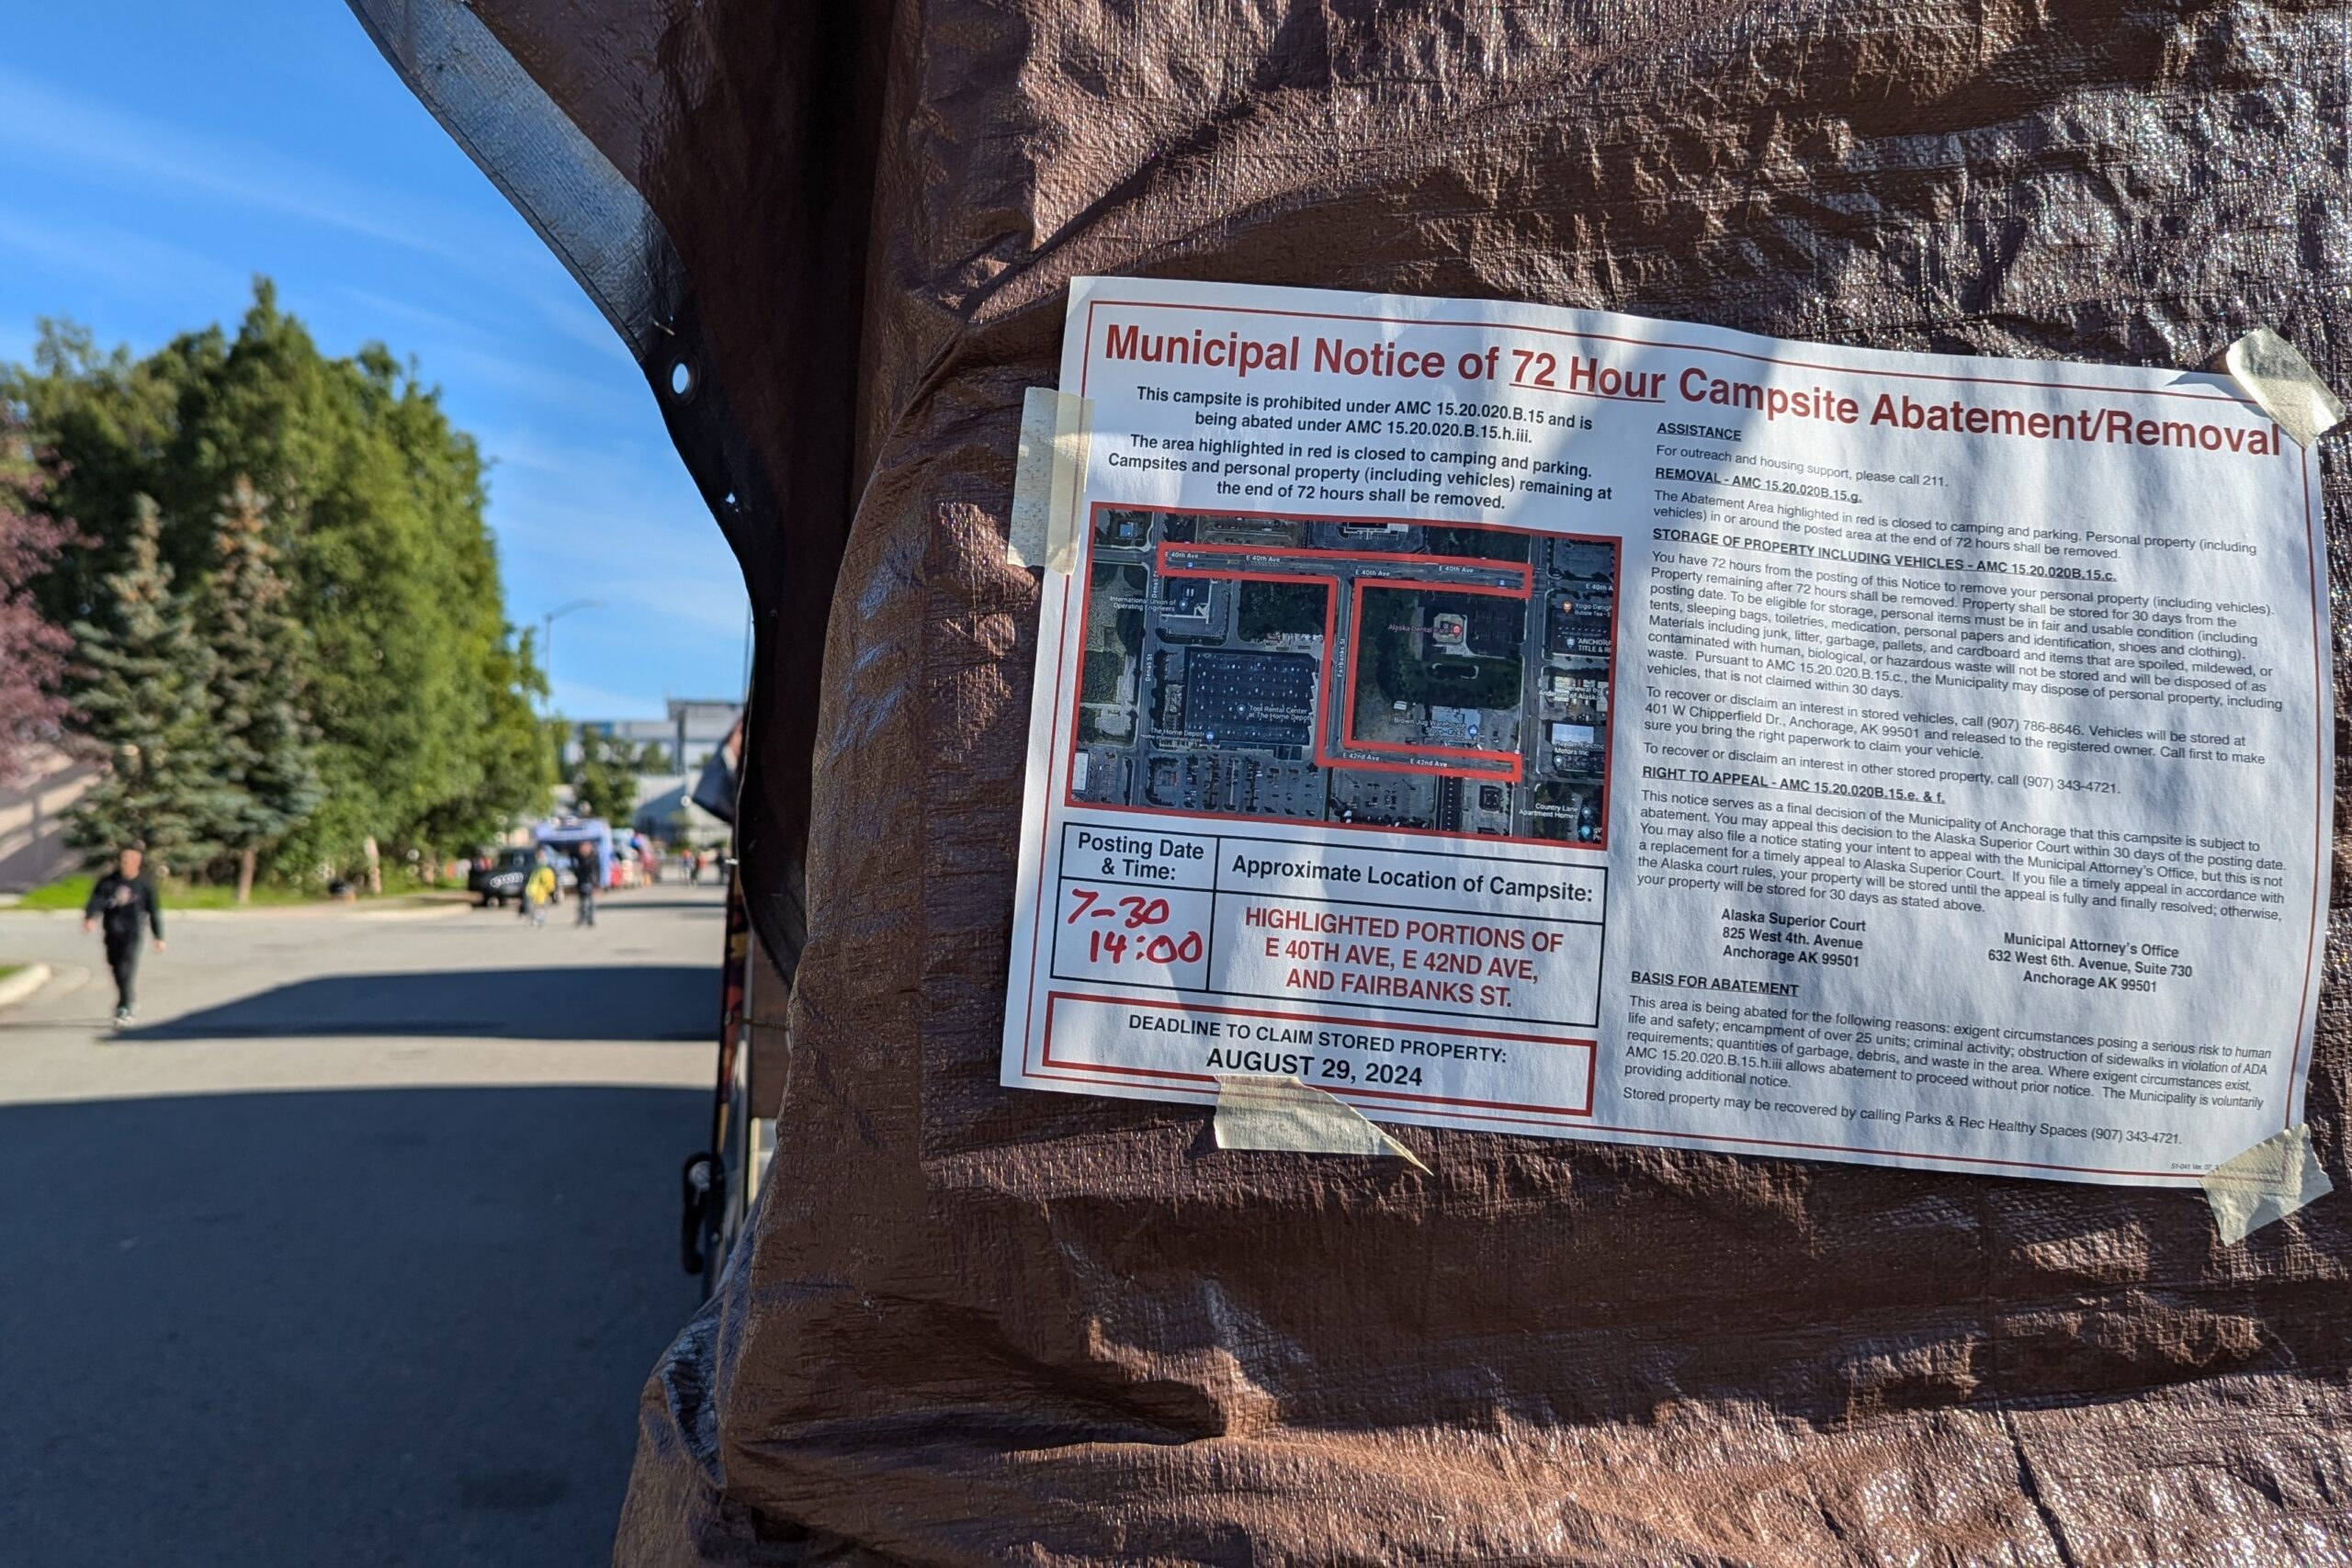 An abatement notice is taped to a brown tarp on a street with many makeshift shelters